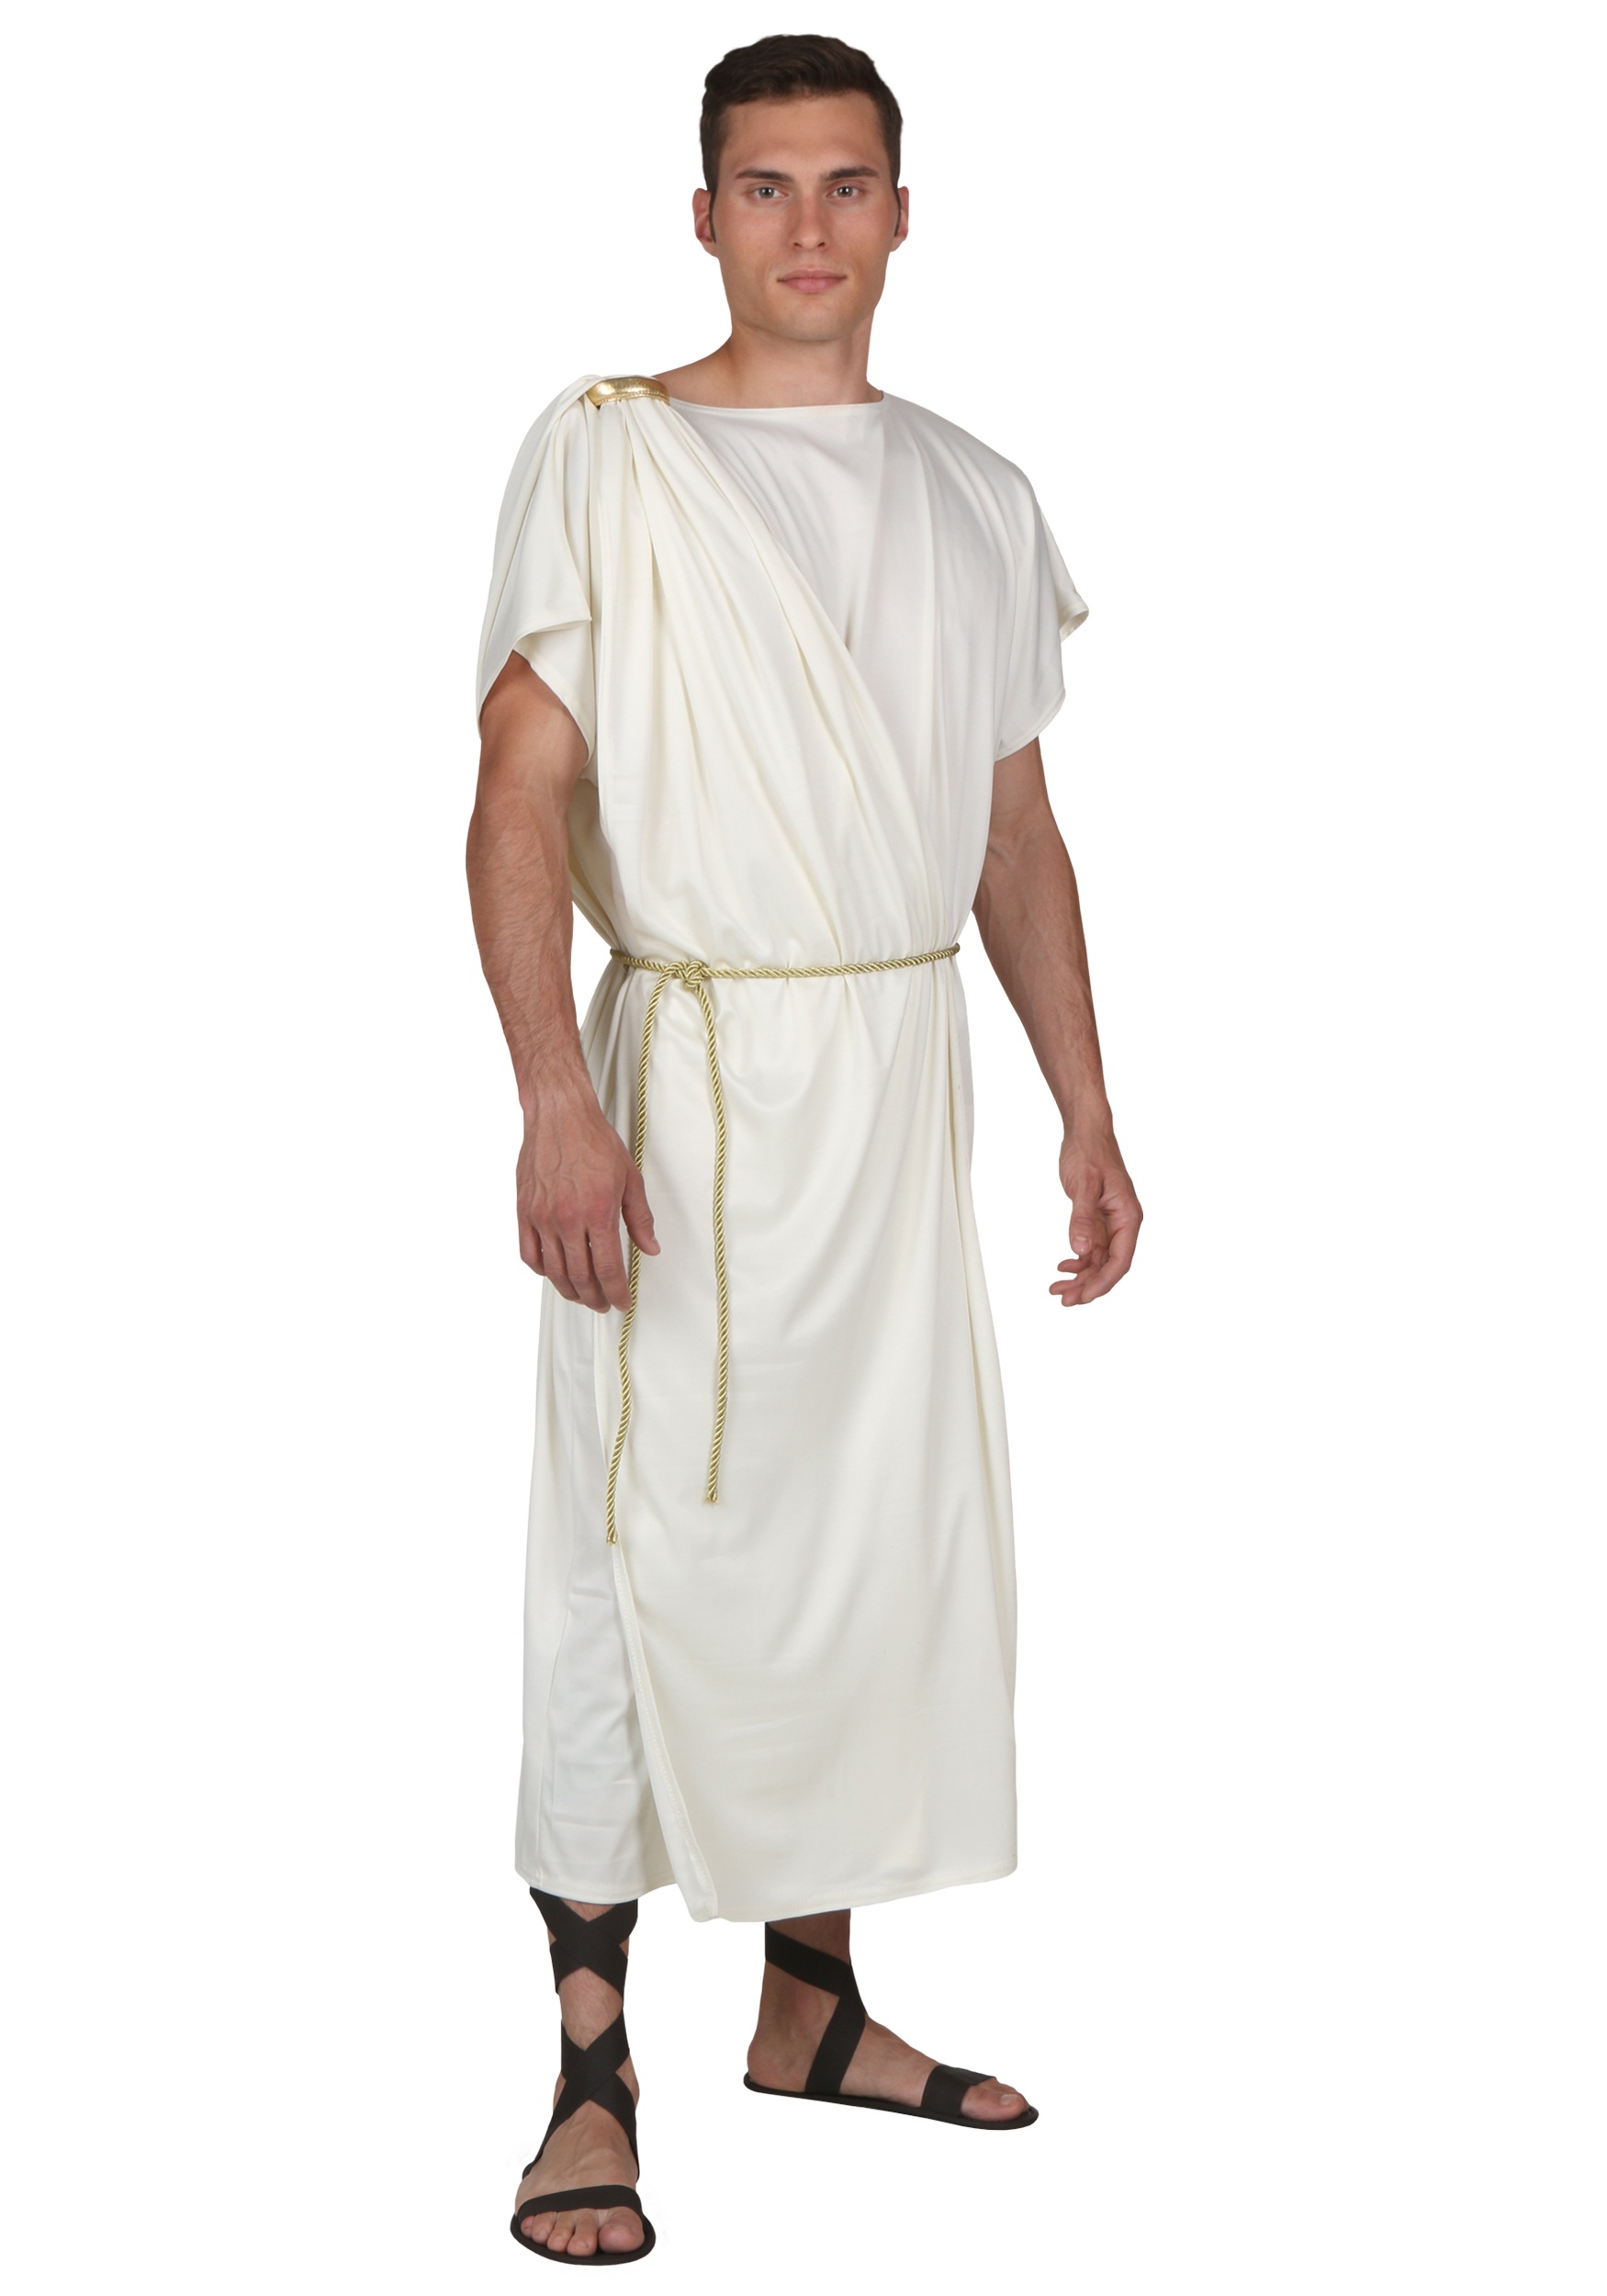 Photos - Fancy Dress FUN Costumes Toga Halloween Costume for Men | Exclusive | Made By Us Costu